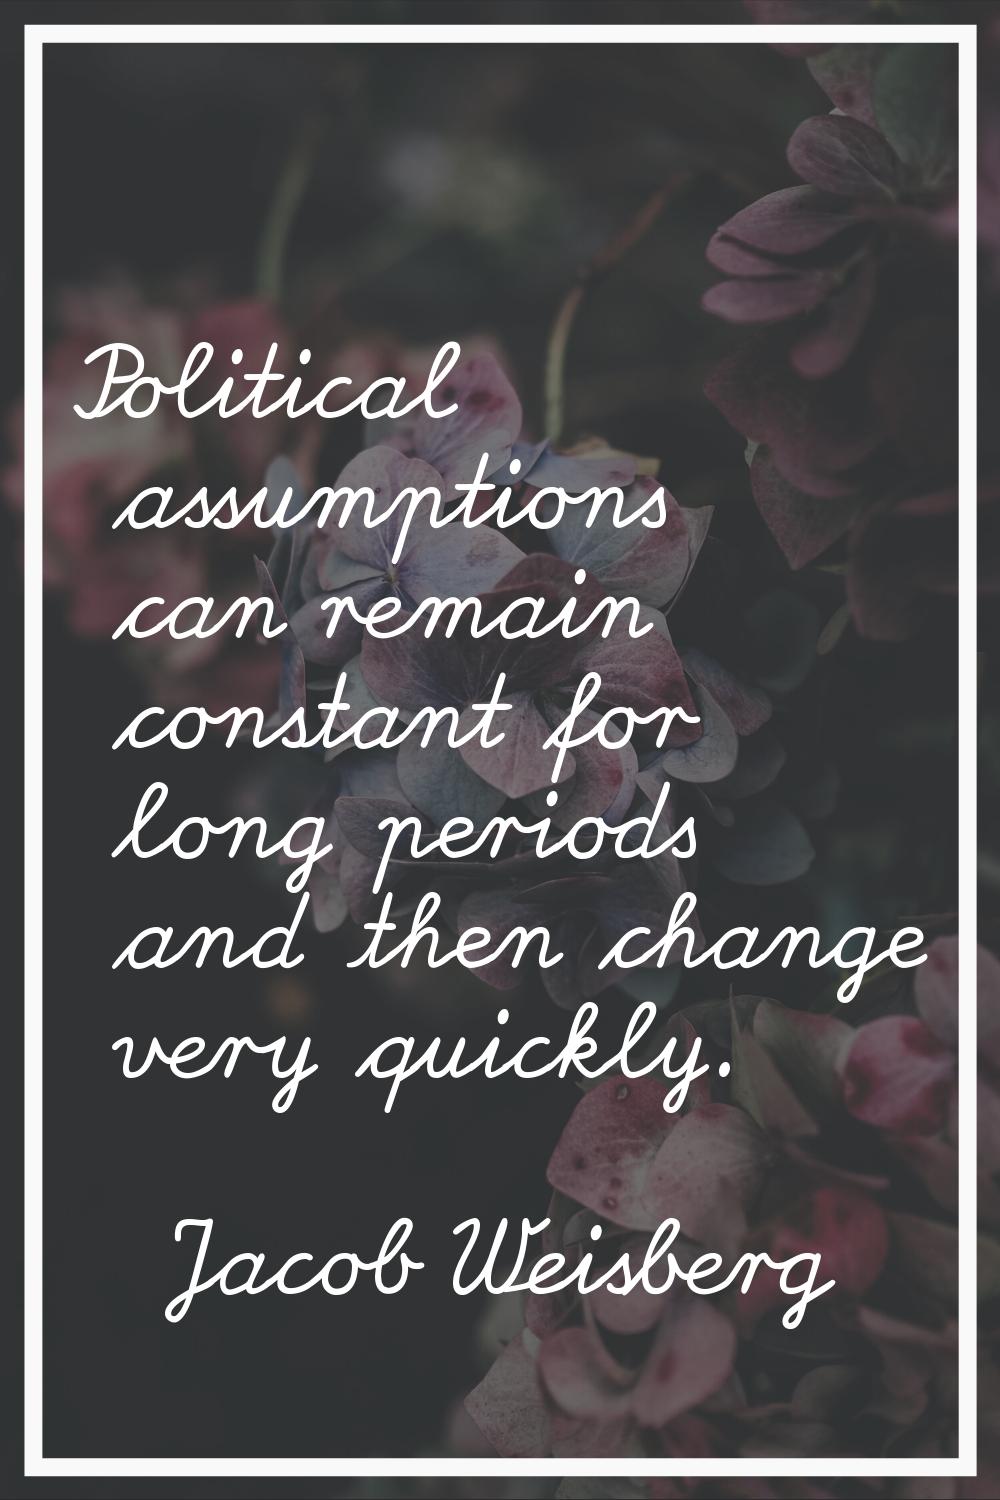 Political assumptions can remain constant for long periods and then change very quickly.